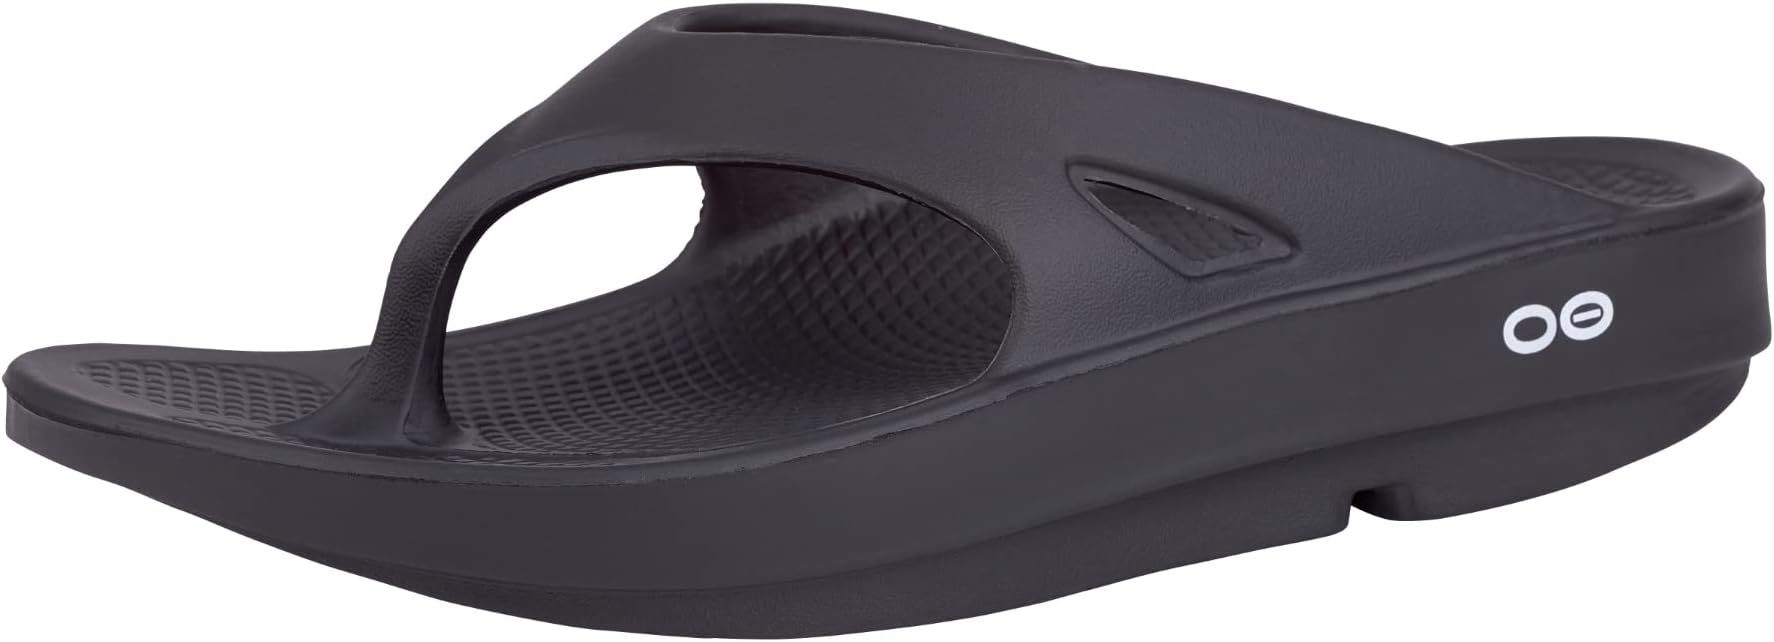 OOFOS OOriginal Sandal - Lightweight Recovery Footwear - Reduces Stress on Feet, Joints & Back - ... | Amazon (US)